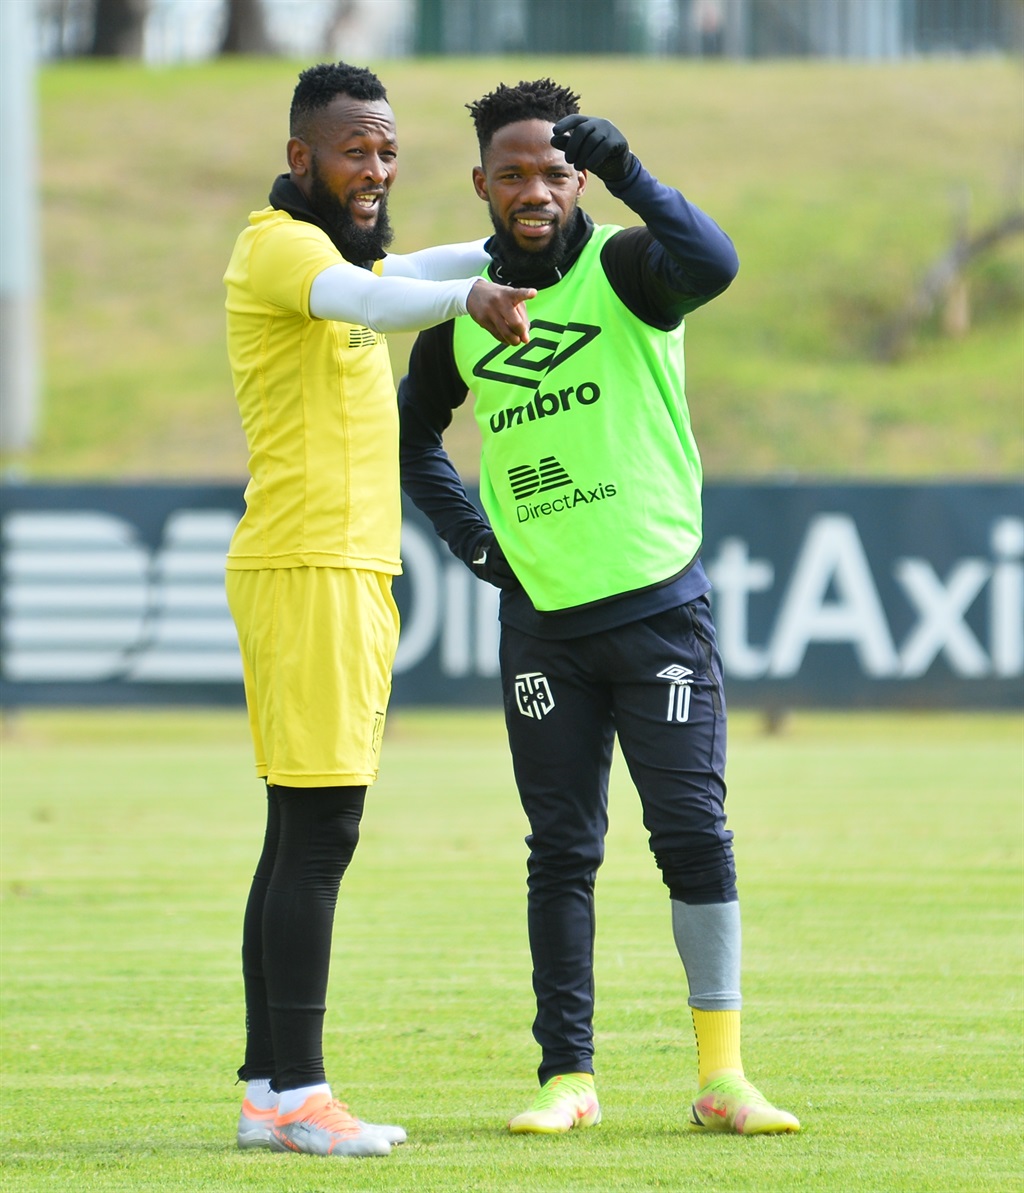 CAPE TOWN, SOUTH AFRICA - MAY 11: Mpho Makola and Mduduzi Mdantsane during the Cape Town City FC media open day at Hartleyvale Stadium on May 11, 2022 in Cape Town, South Africa. (Photo by Grant Pitcher/Gallo Images)